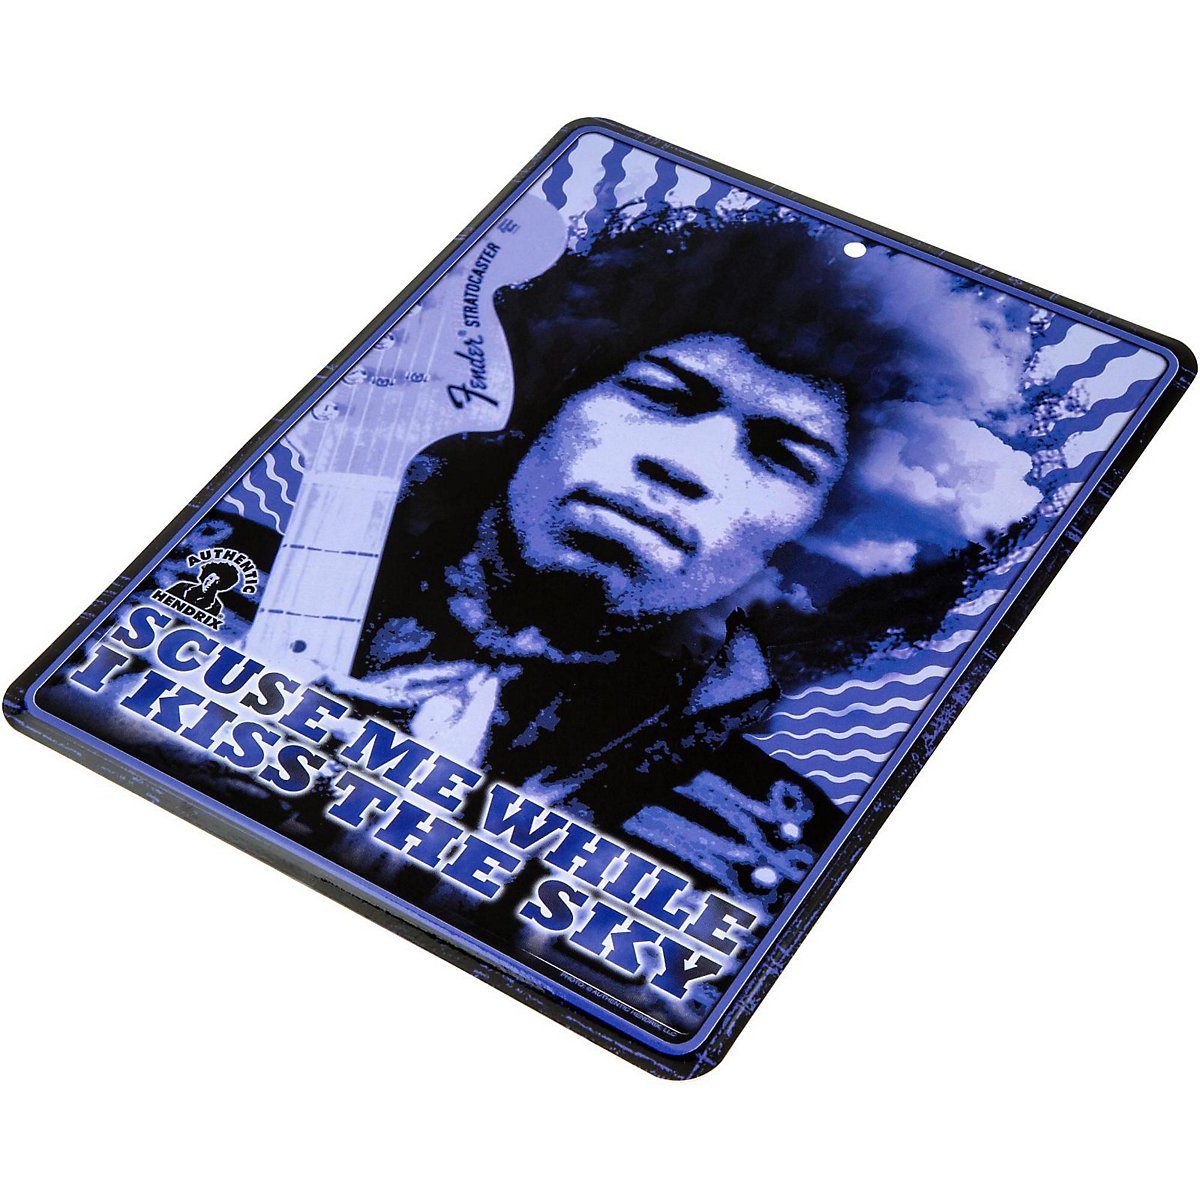 Fender Tin Sign Jimi Hendrix Kiss The Sky - Plate with advertising - Variation 1